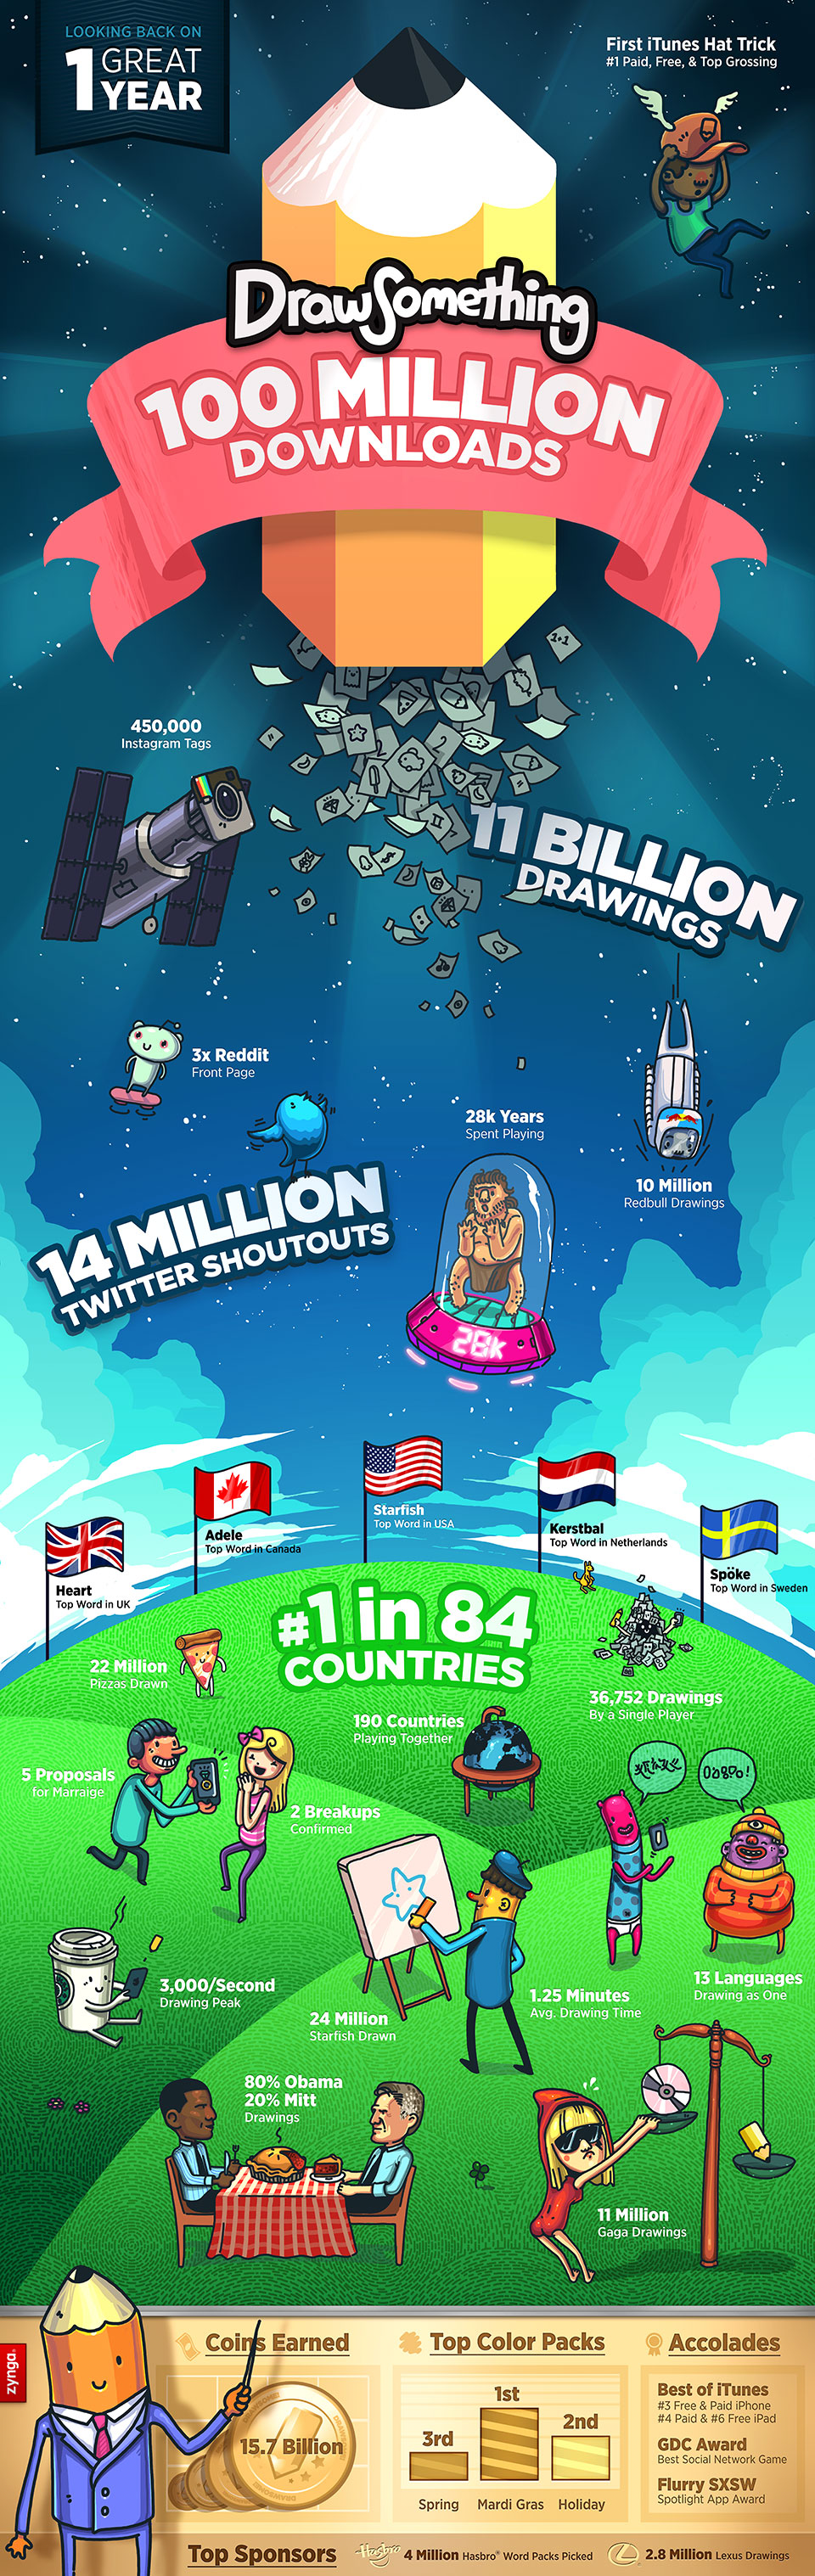 Draw-Something-Infographic_Final